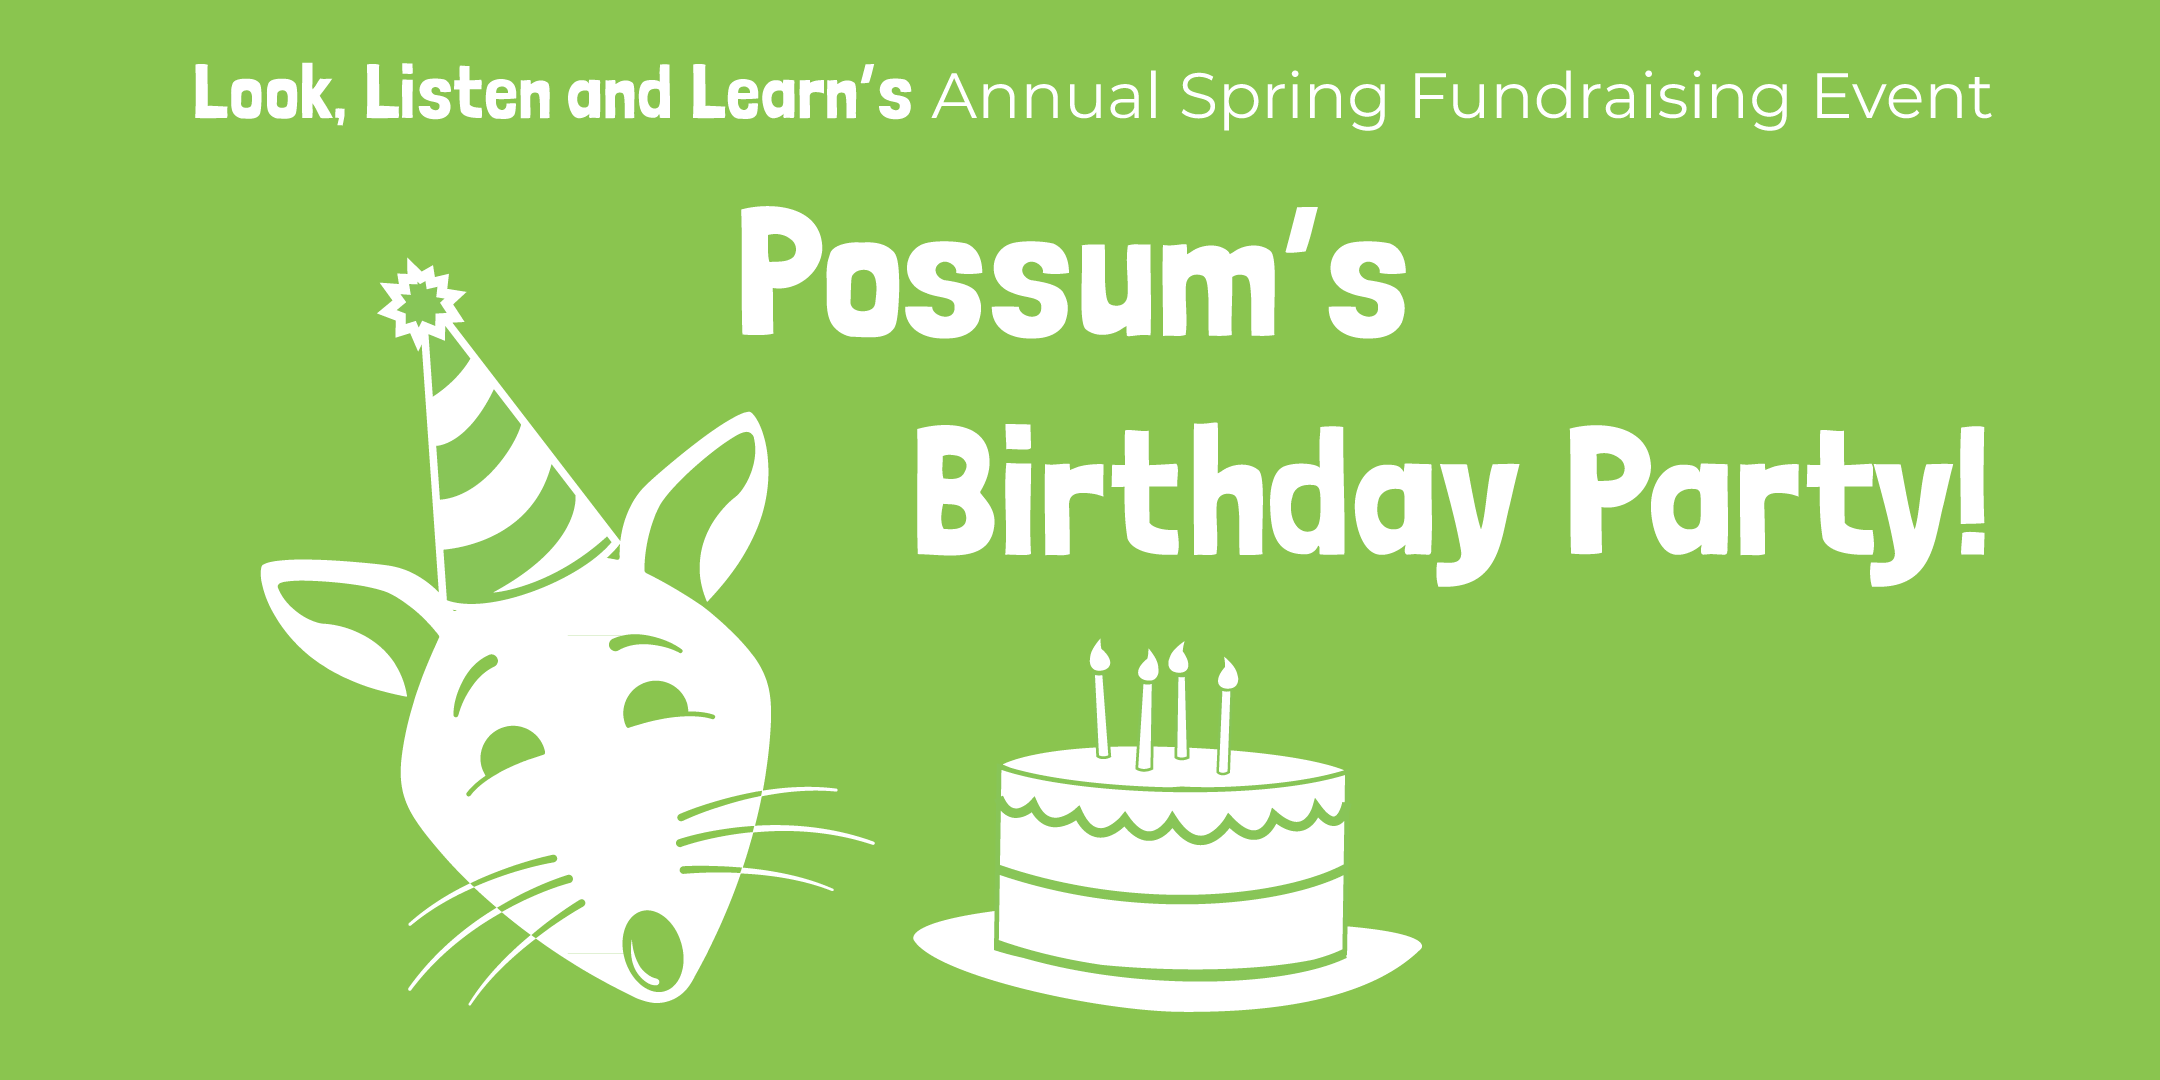 Possum's Birthday Party - LL+L's Spring Fundraising Event